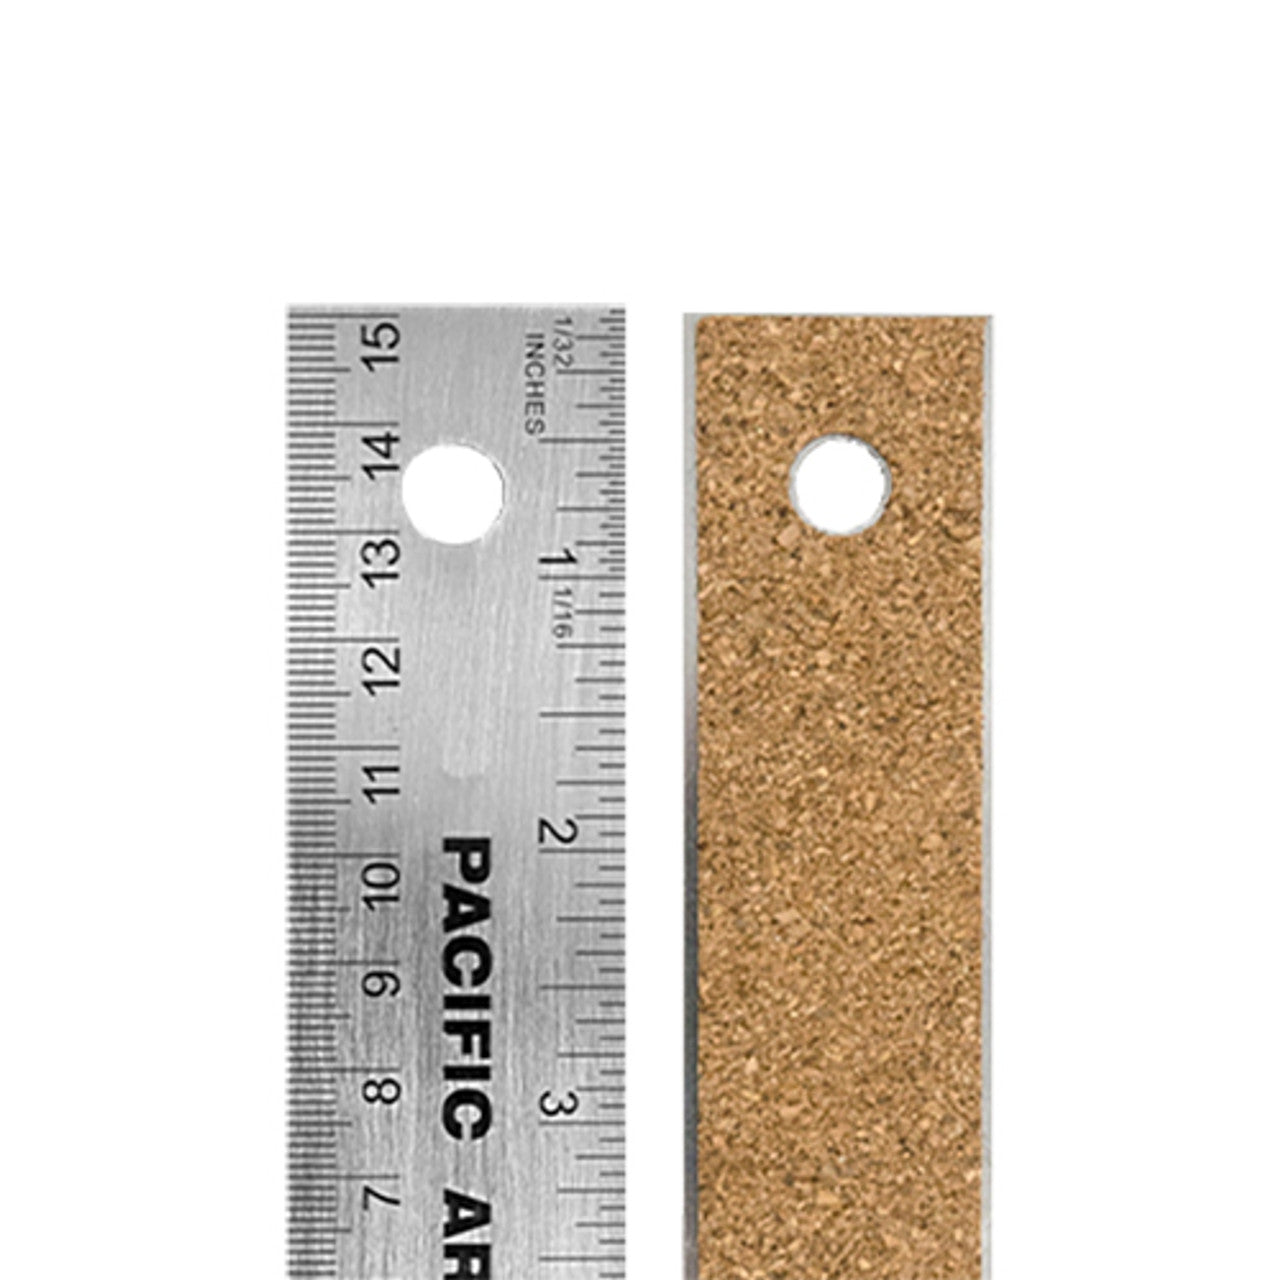 Pacific Arc Stainless Steel Ruler with Cork Back - 24 Inch - by K. A. Artist Shop - K. A. Artist Shop